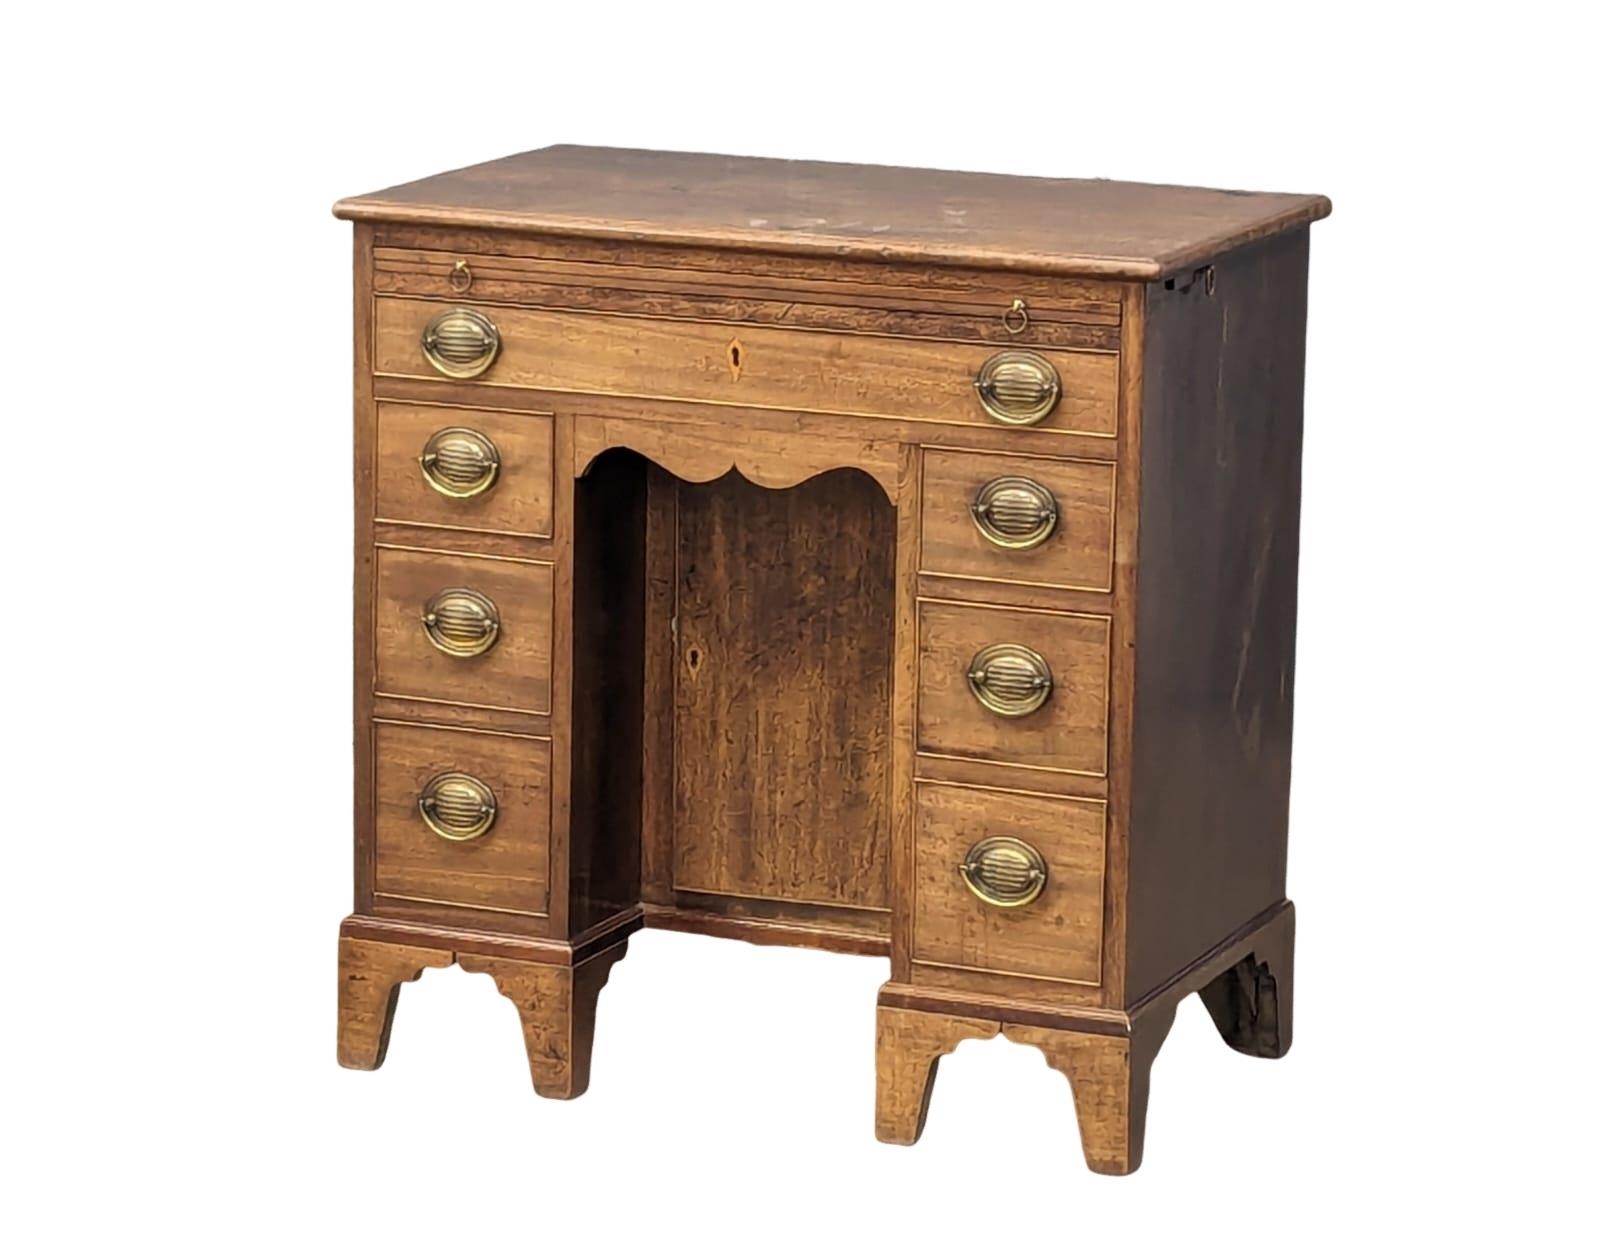 A small Early George III mahogany writing desk with candle stands. Circa 1760-1770. 80x47.5x82.5cm. - Image 9 of 9